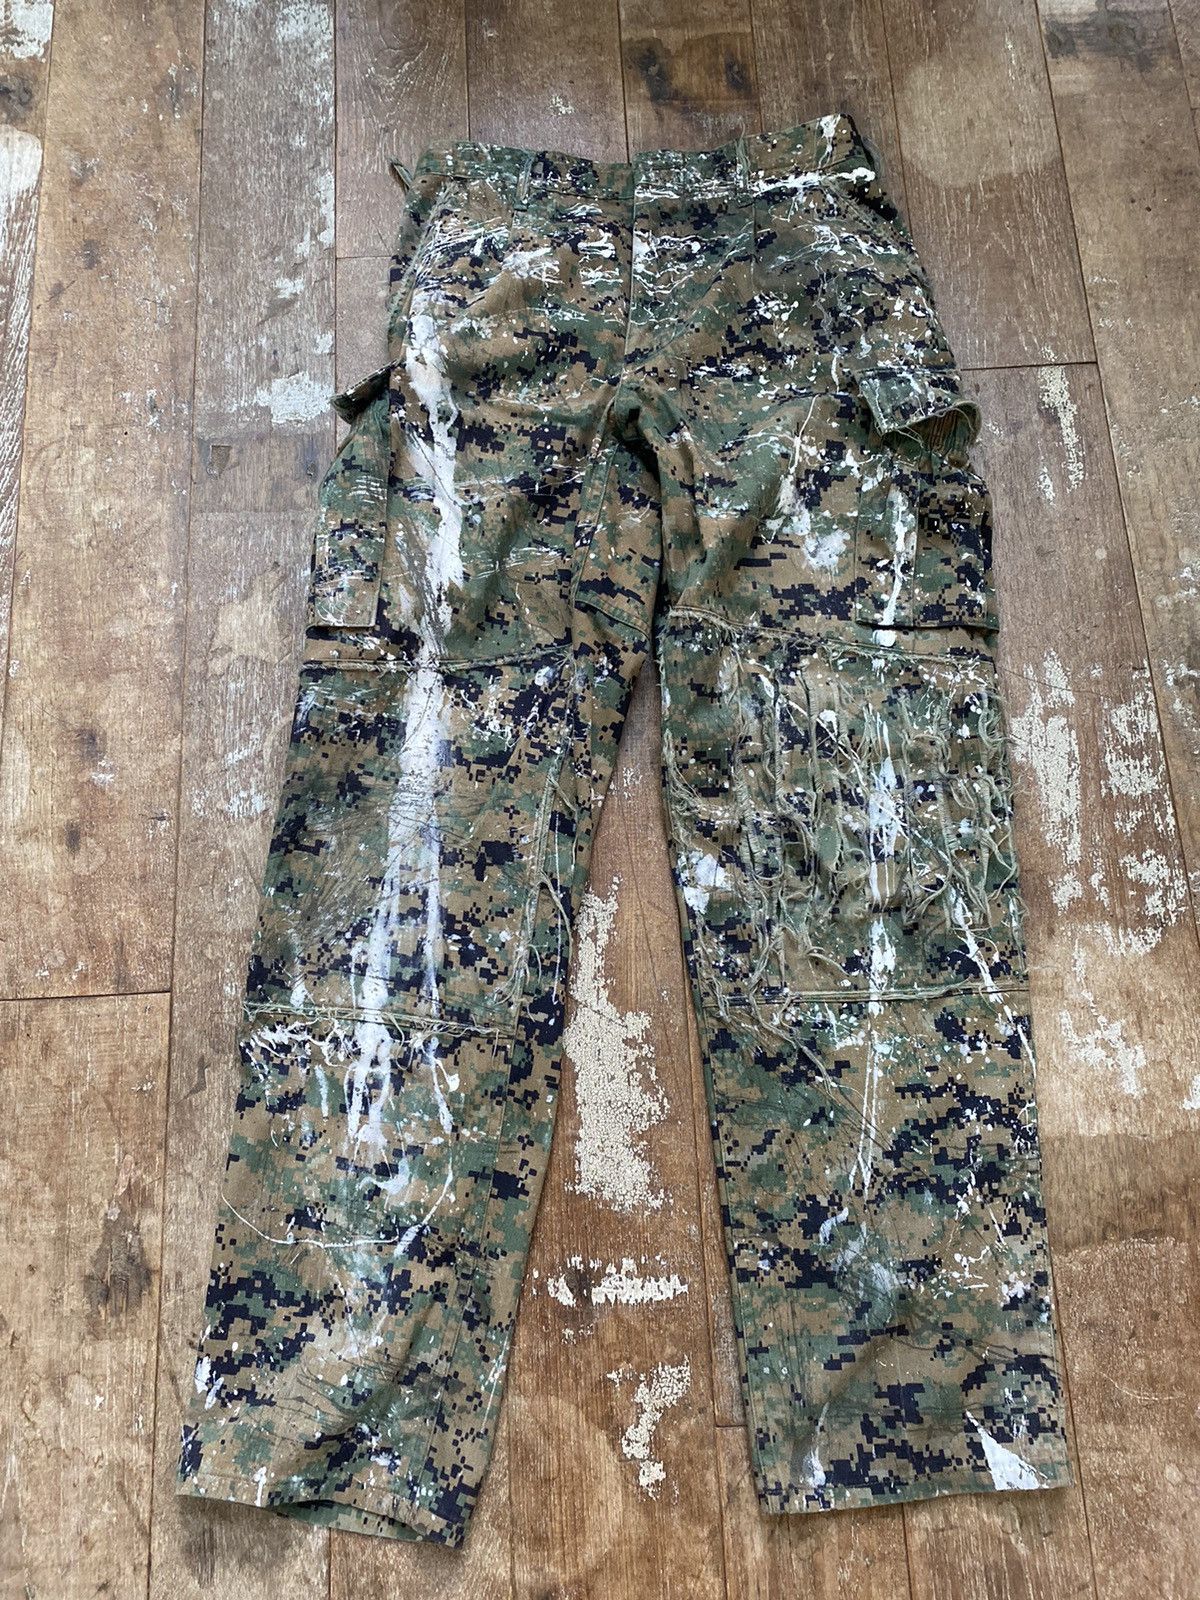 Japanese Brand Distressed, camo pants Size US 32 / EU 48 - 1 Preview